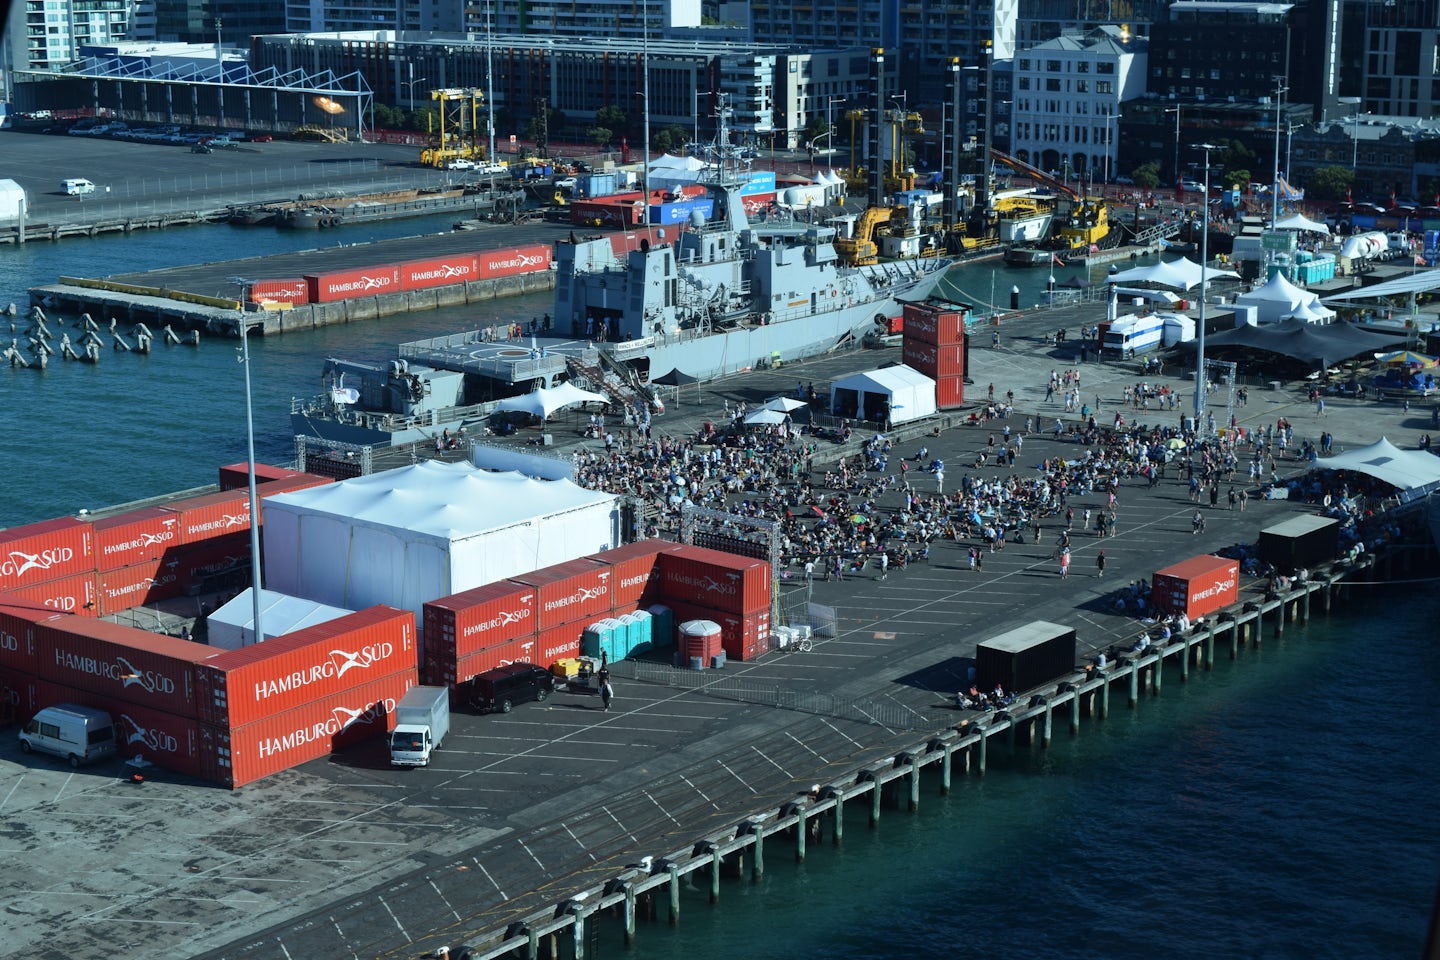 Some of the Auckland Anniversary Day activities from Diamond Princess.